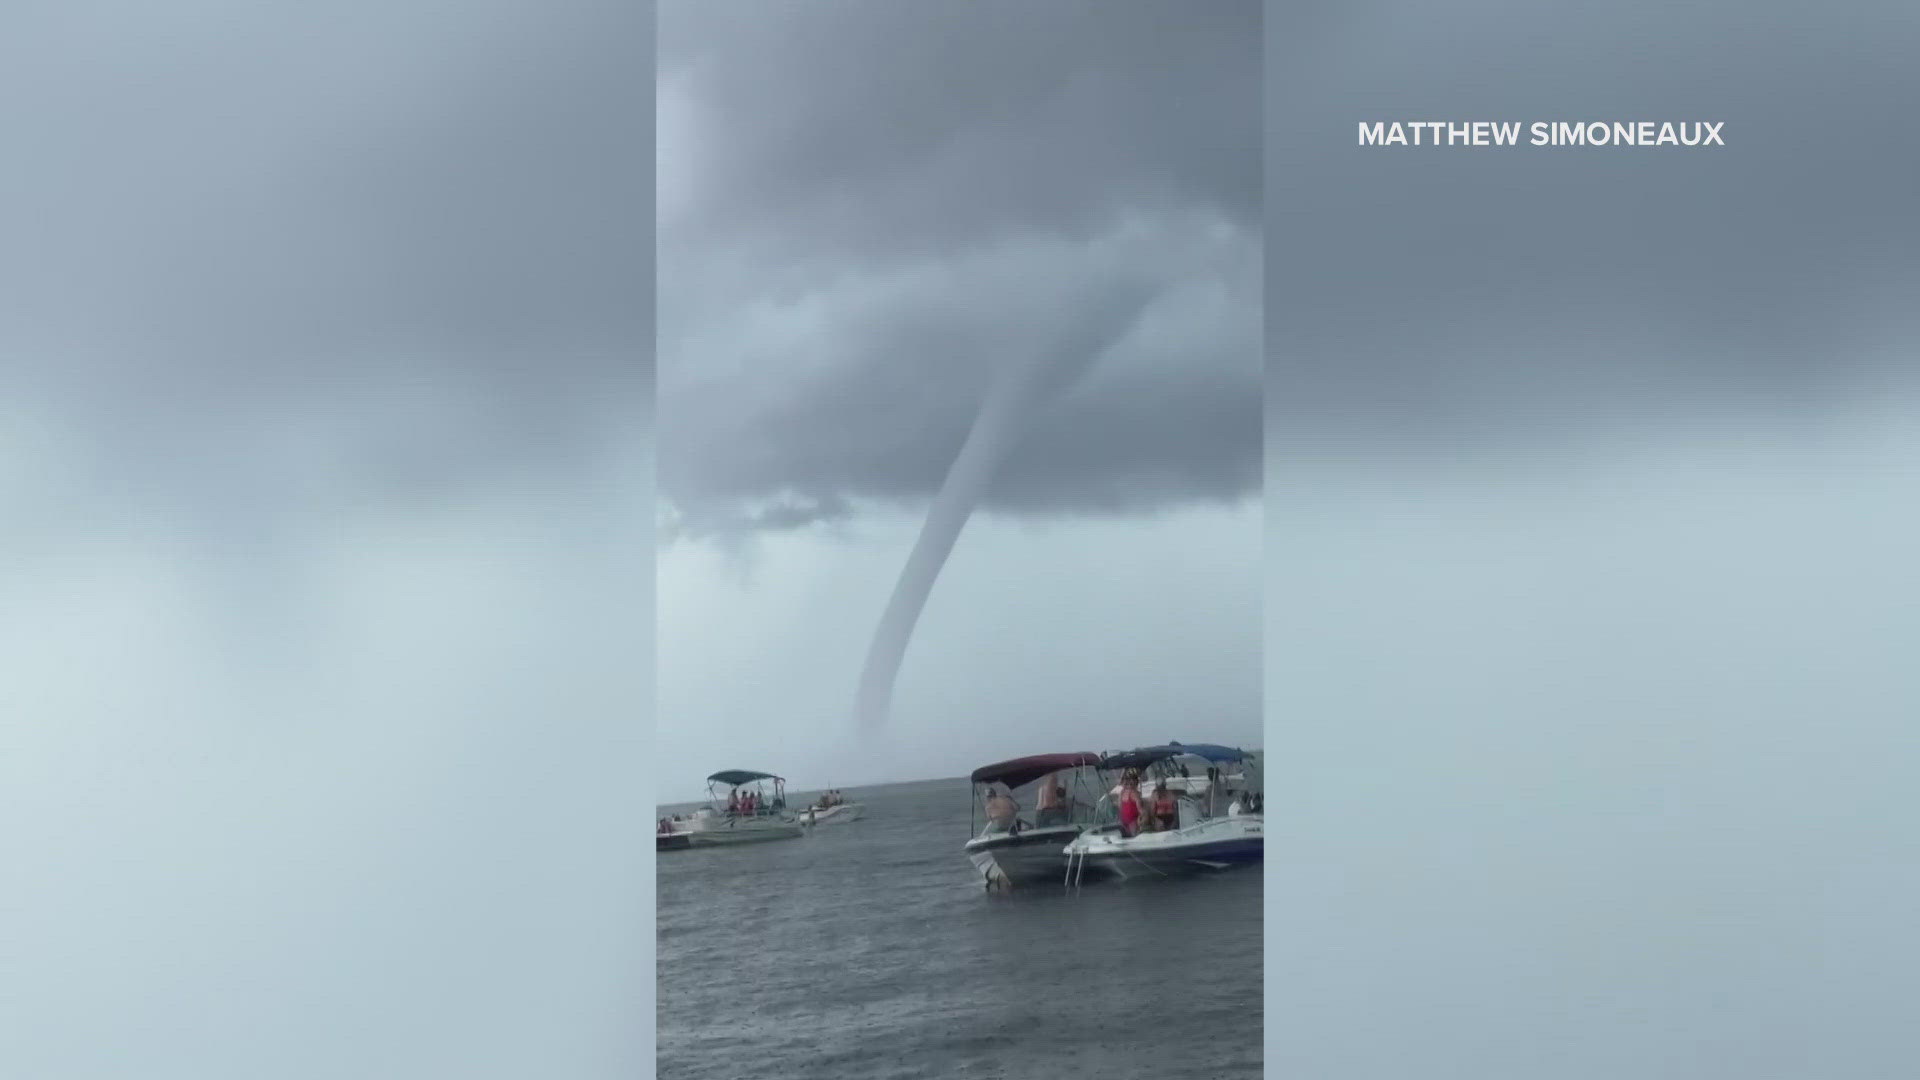 A waterspout was also spotted on the Lake on July 4th, 1981, according to the National Weather Service.